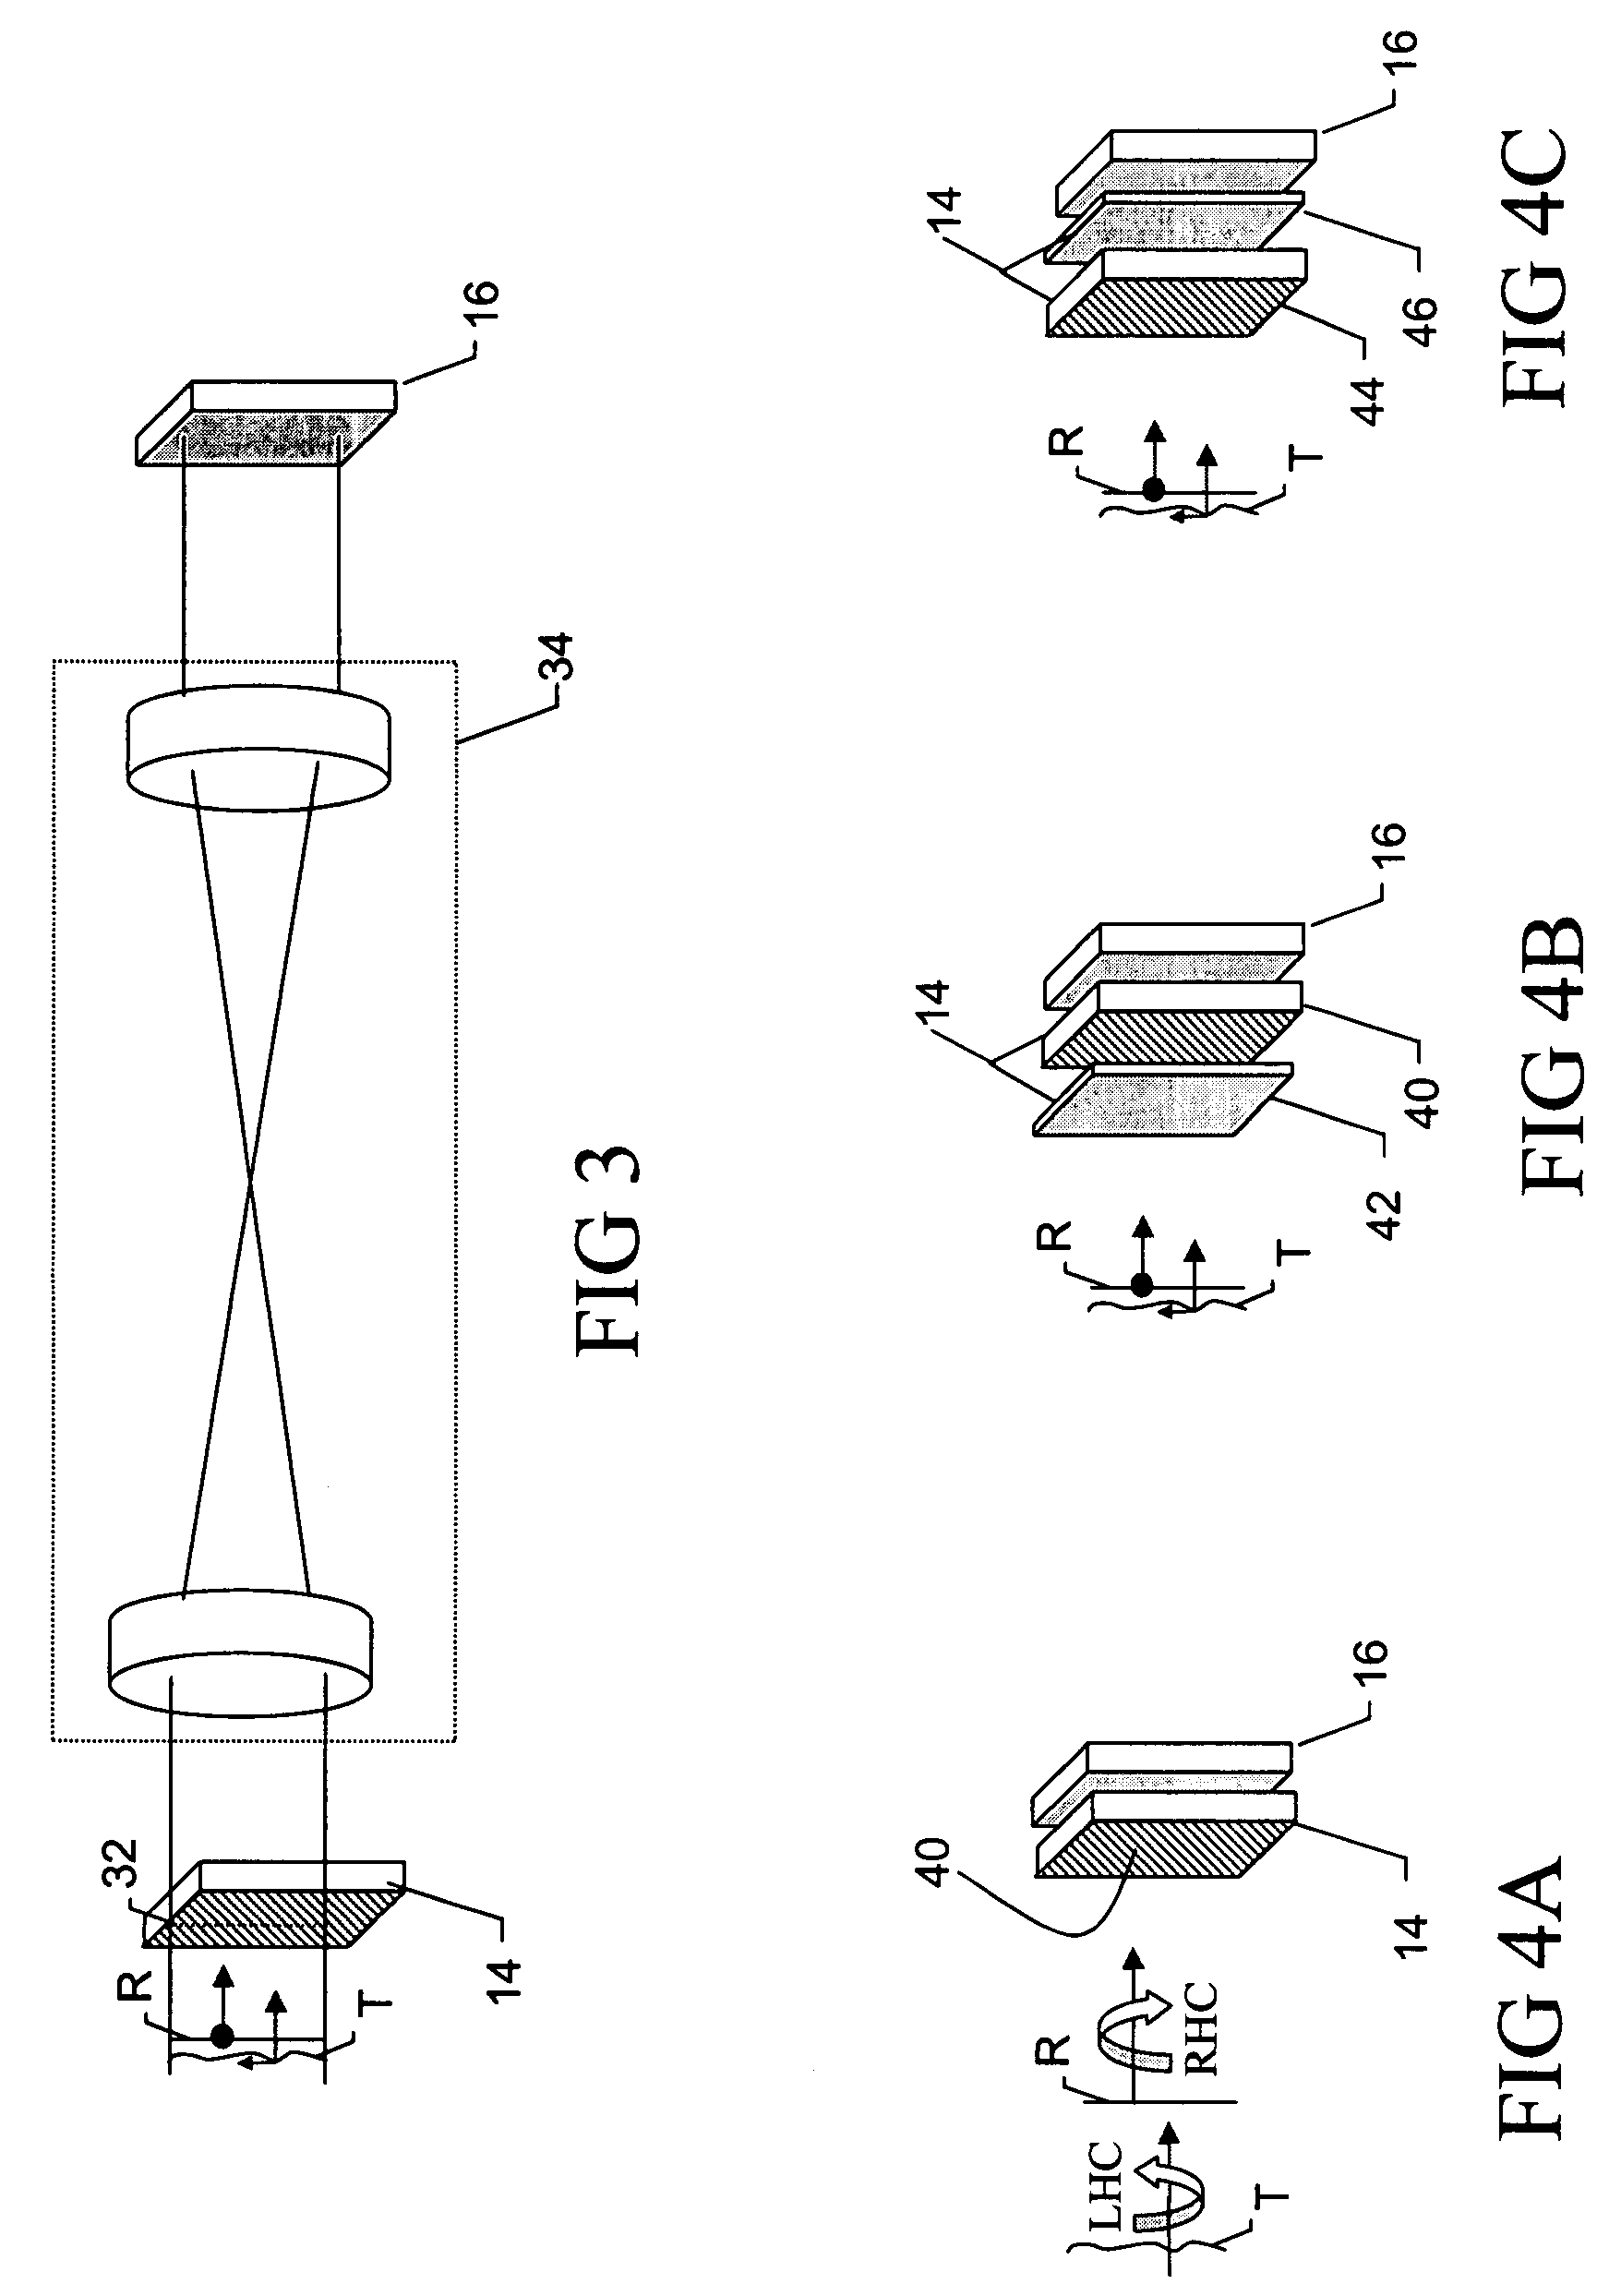 Linear-carrier phase-mask interferometer